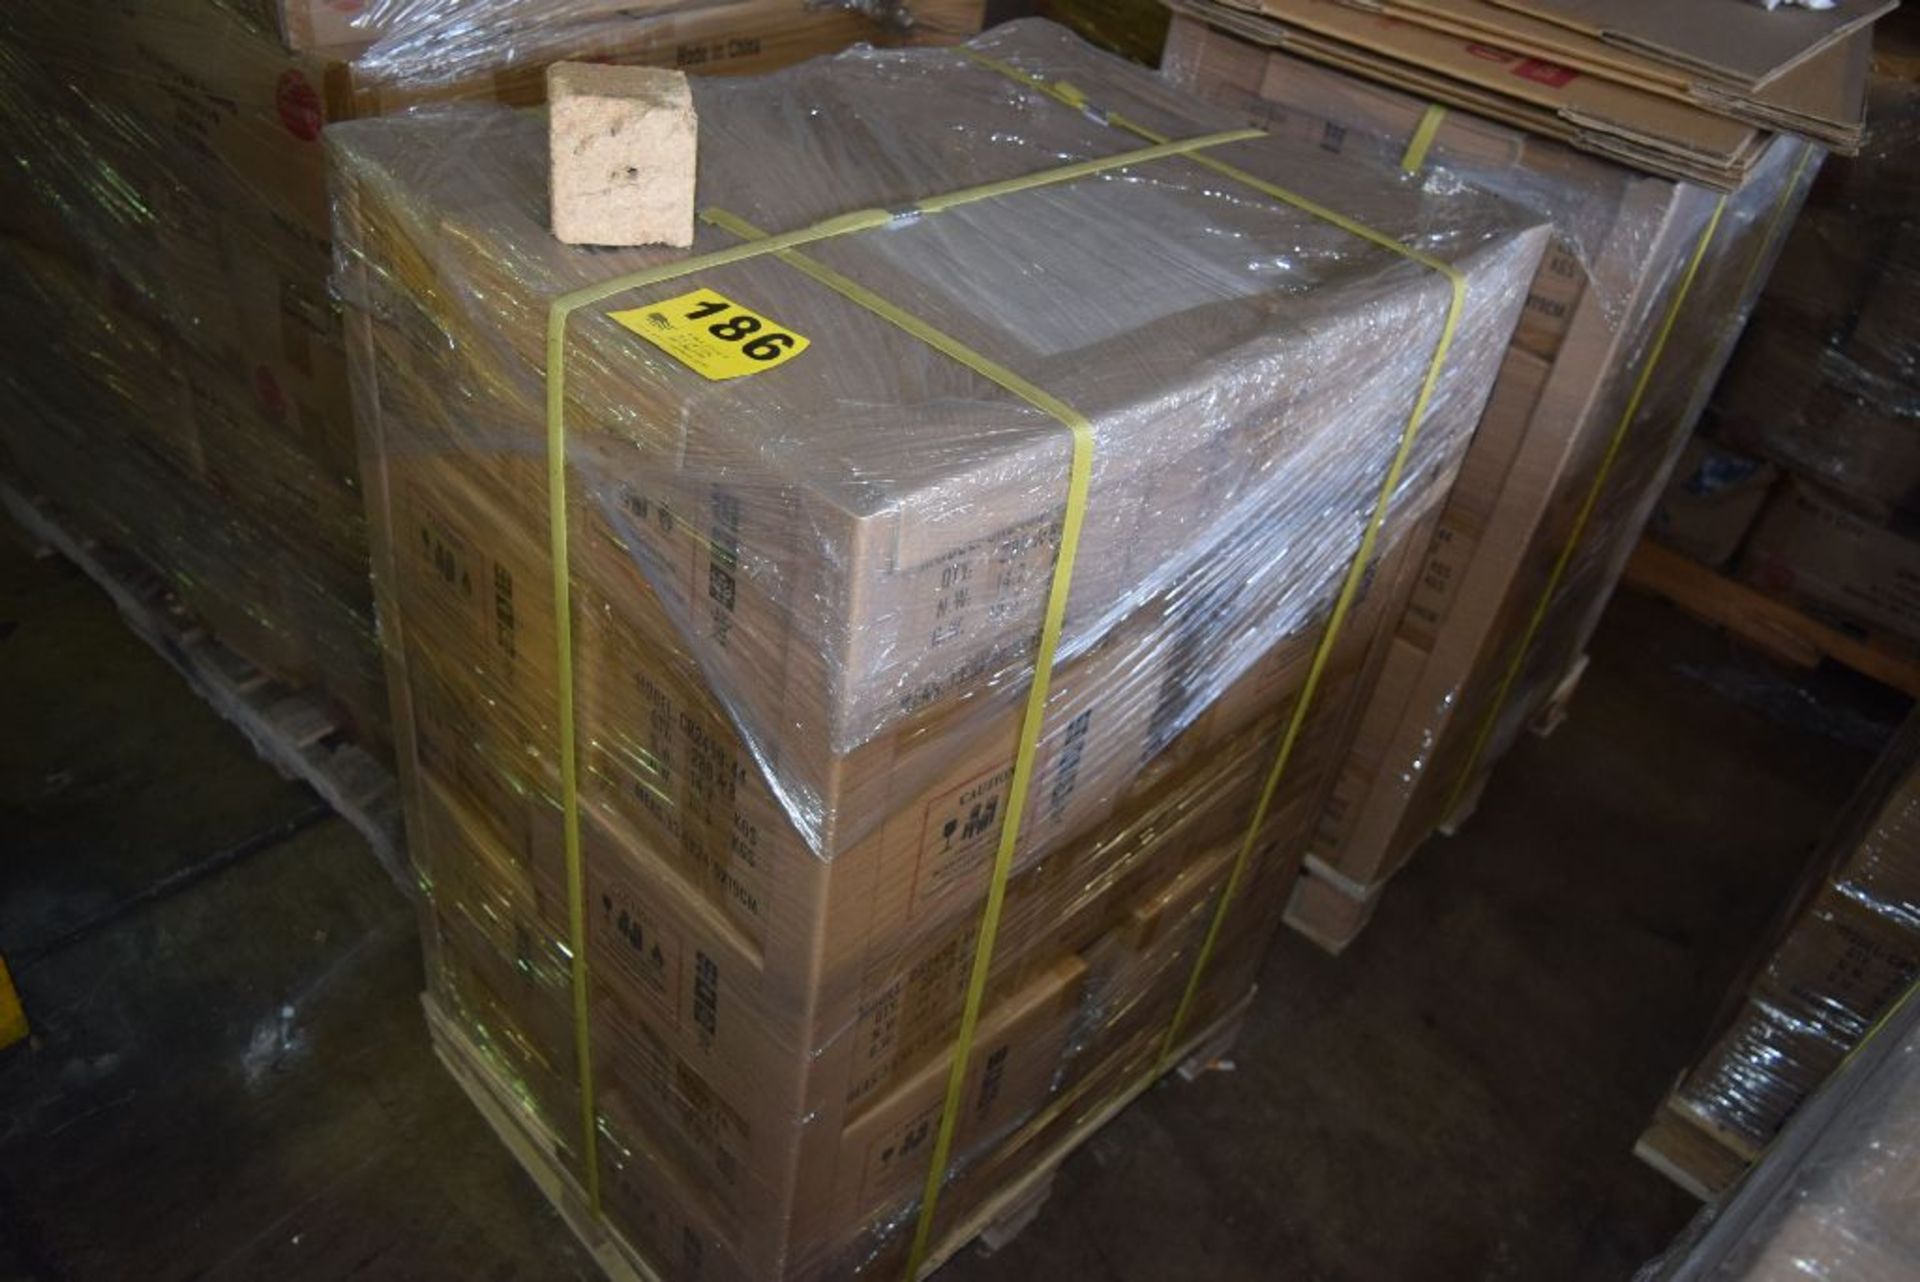 BOXES OF CR2450-44 BATTERIES ON SIX SKIDS